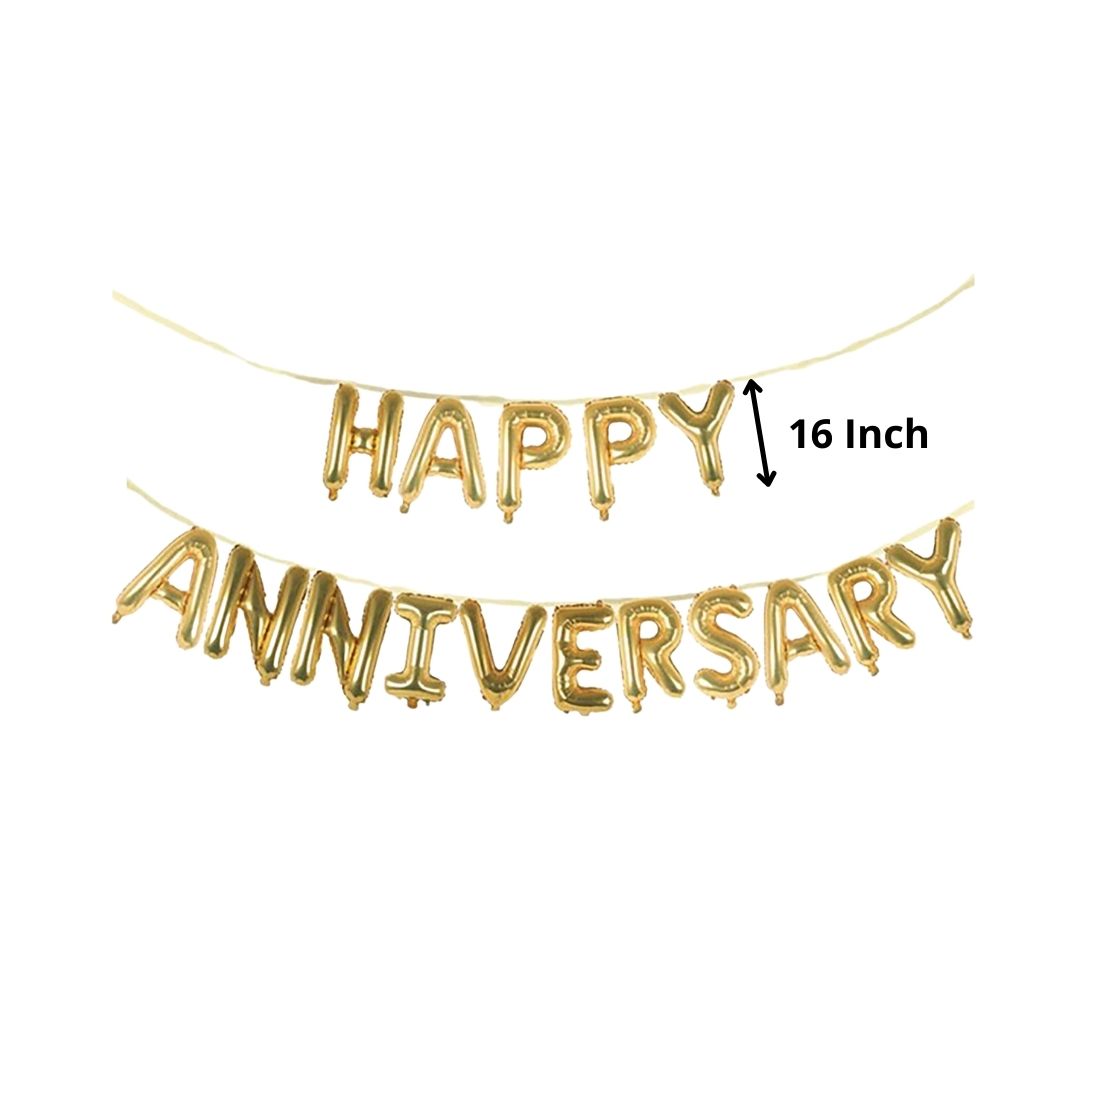 Happy Anniversary Decorations Foil Balloon for Home Decoration 16″Size for Husband Wife/ Anniversary Celebration Balloons